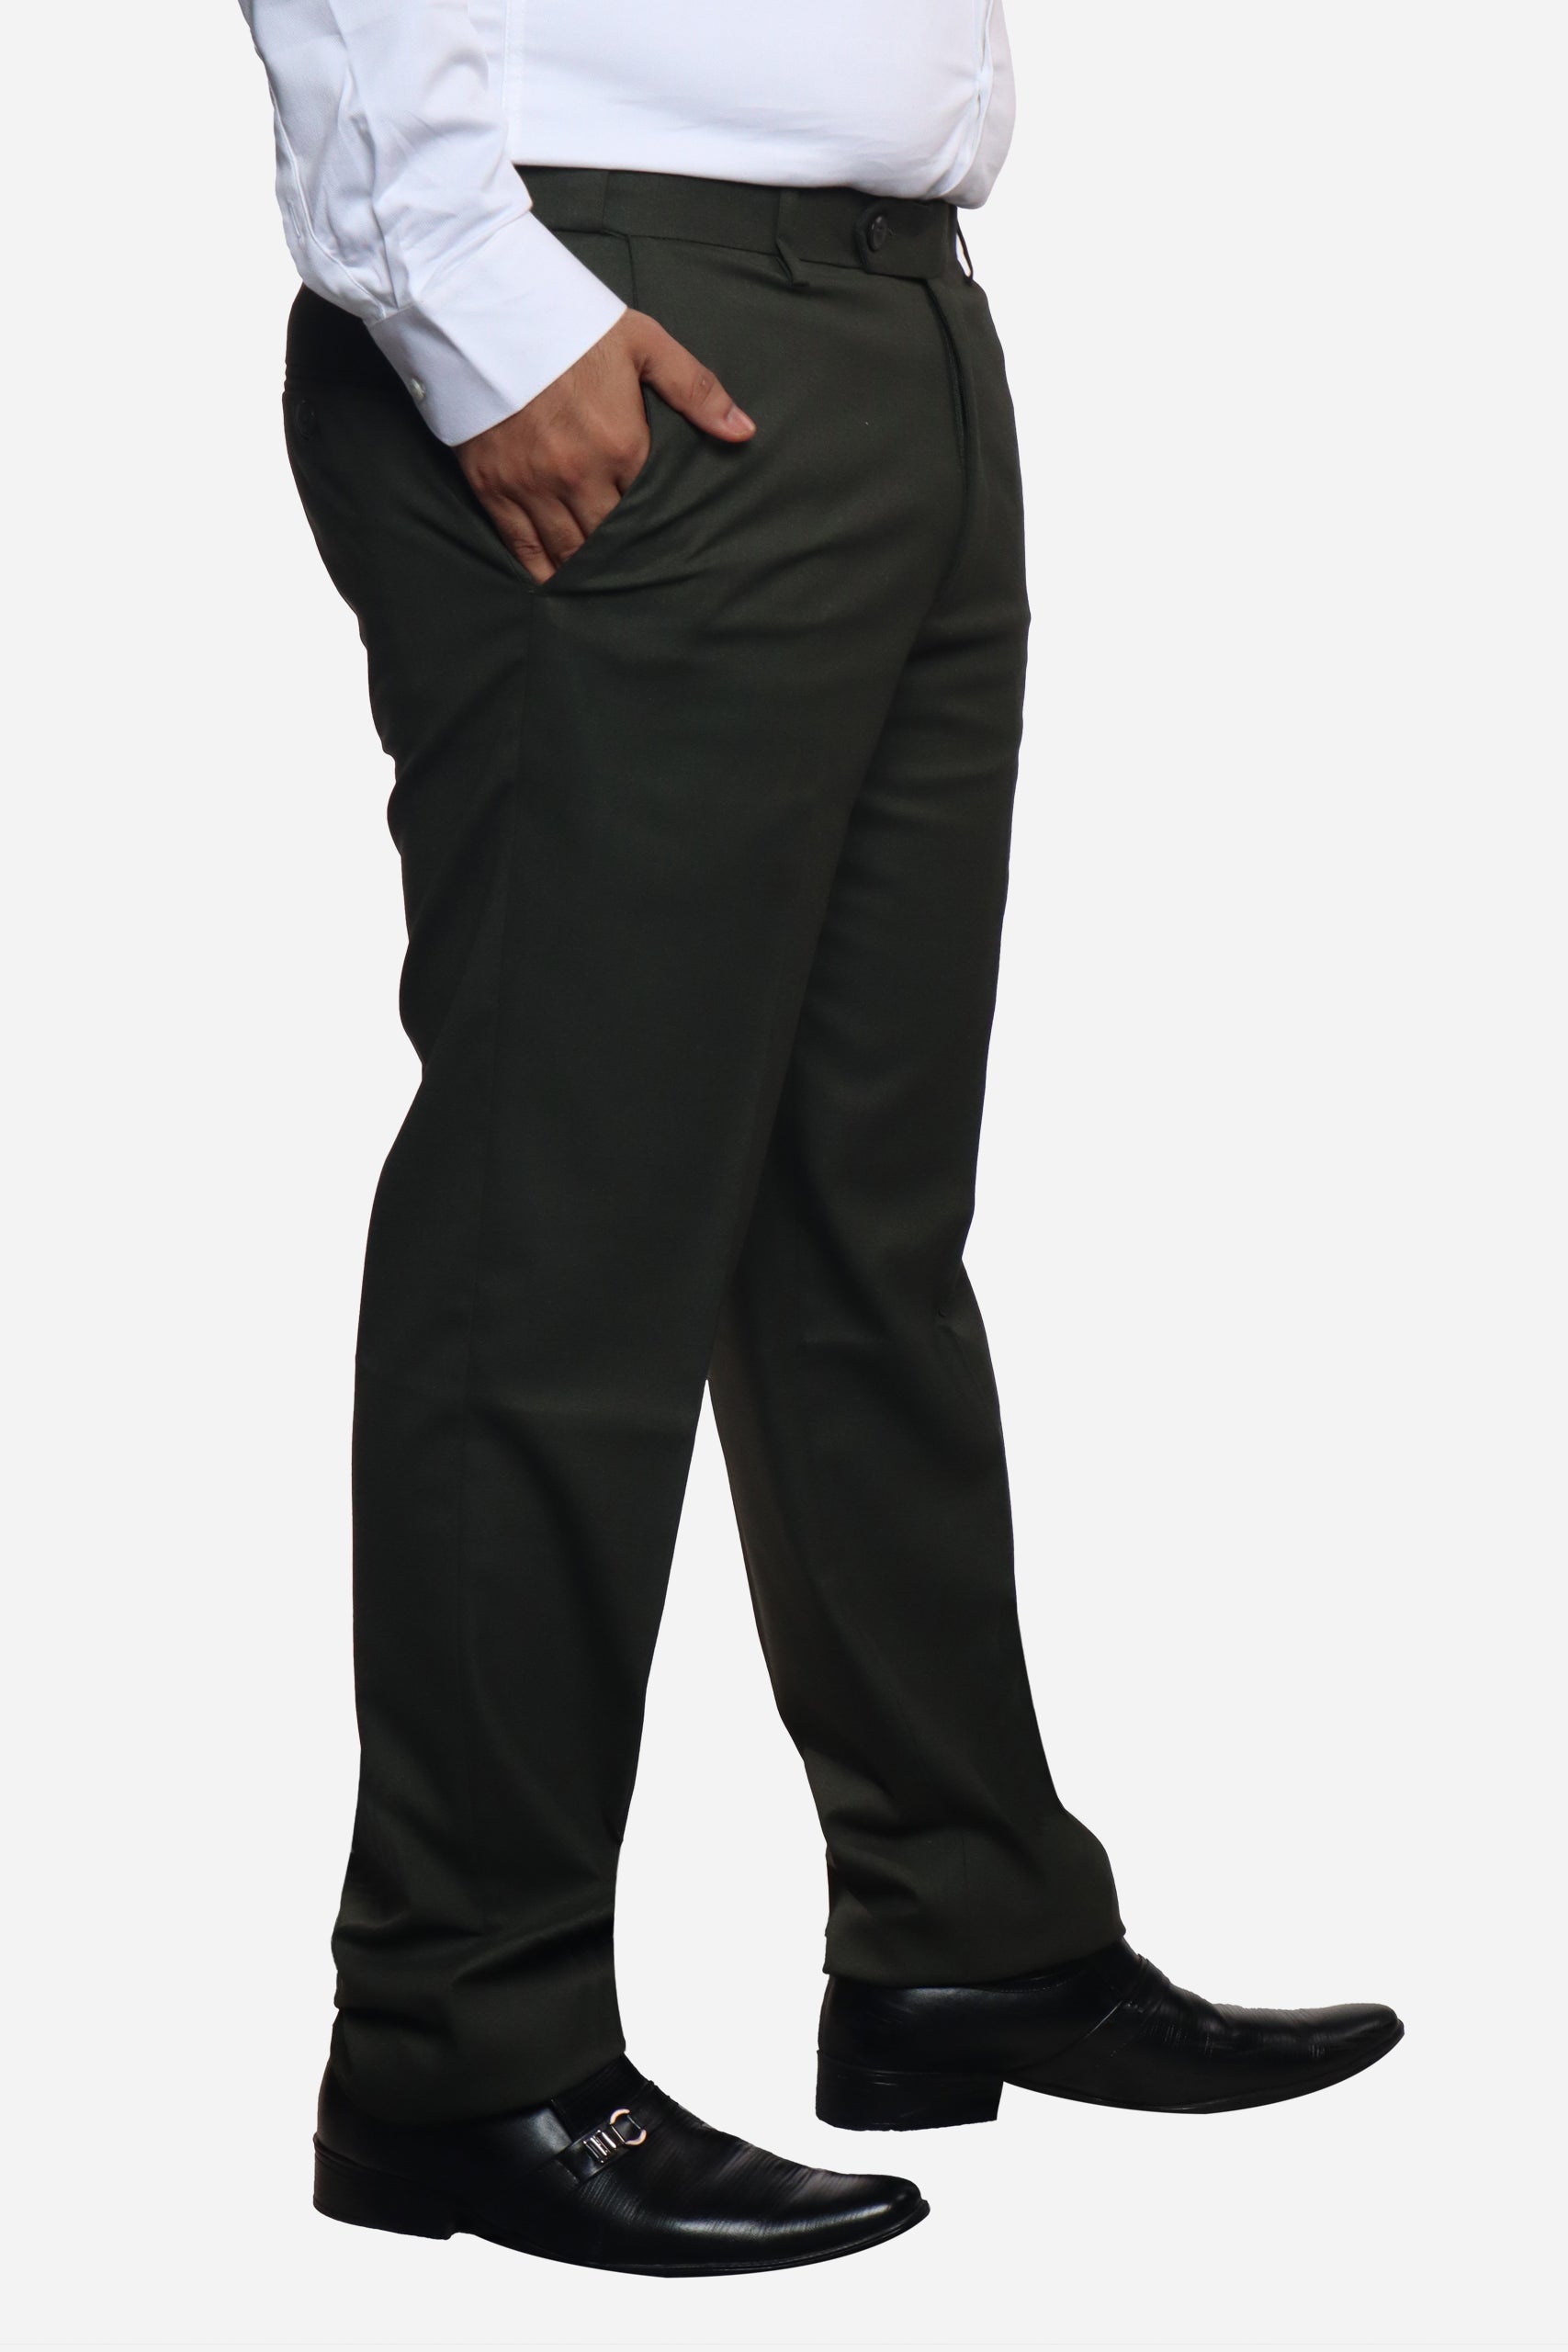 Flexiplus Straight Fit Pant Pro at Best Prices in India